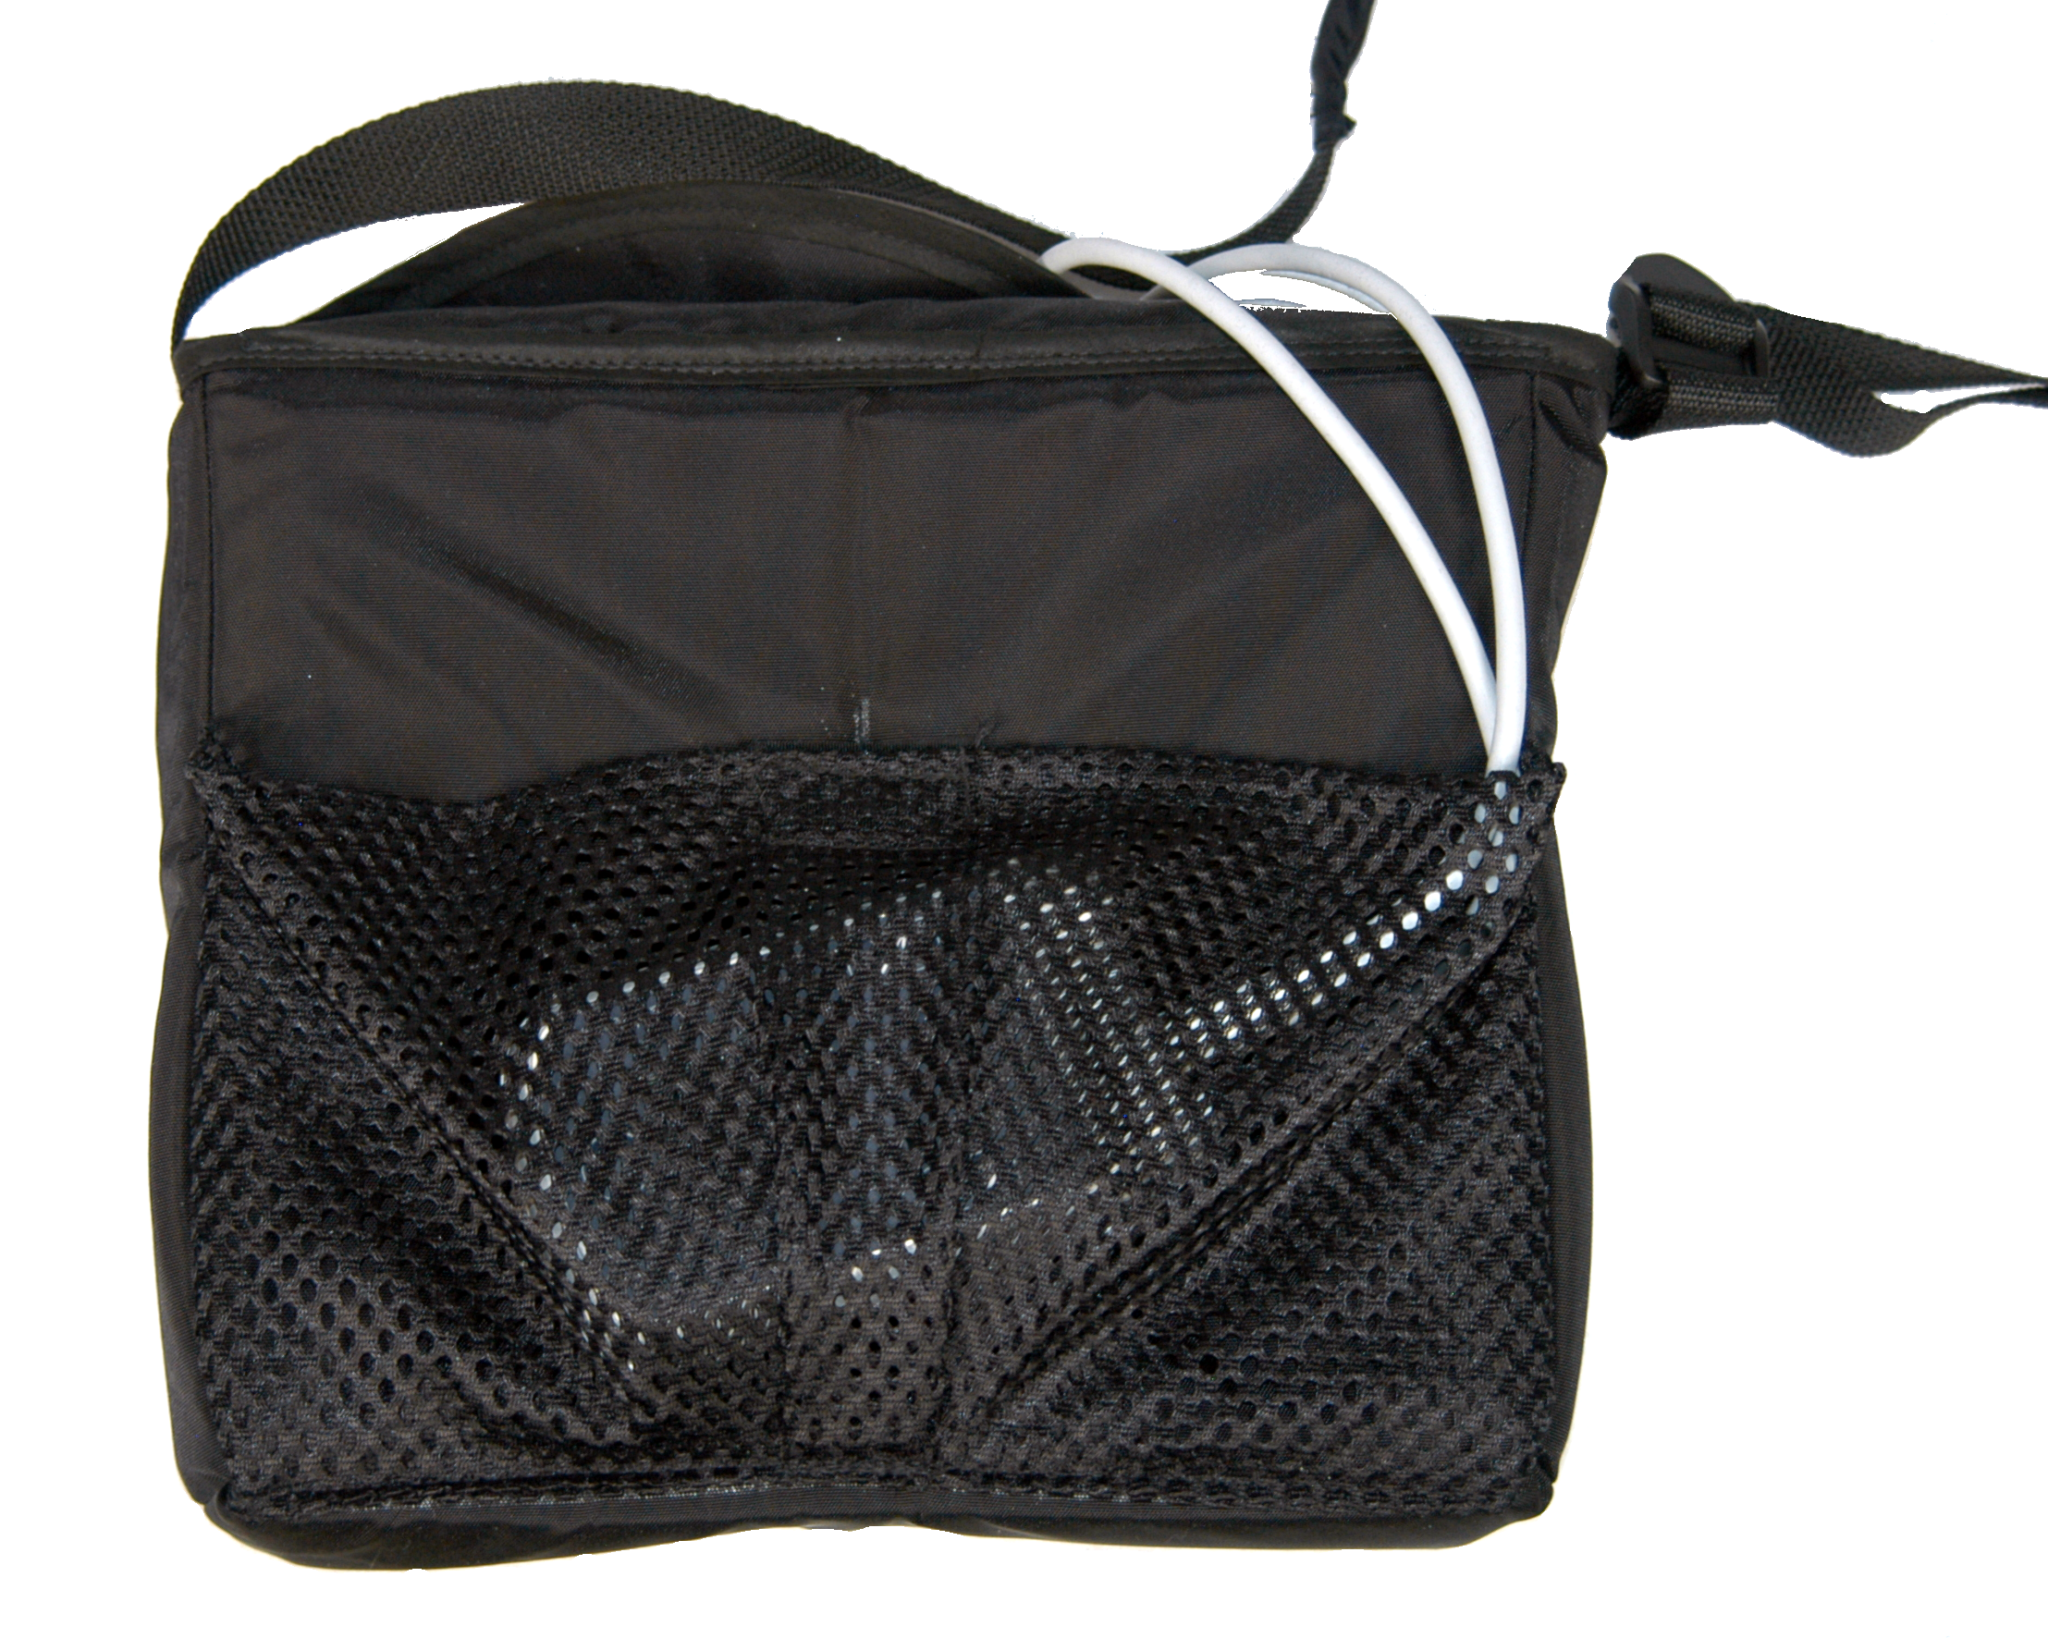 New and improved messenger bags Heartmate